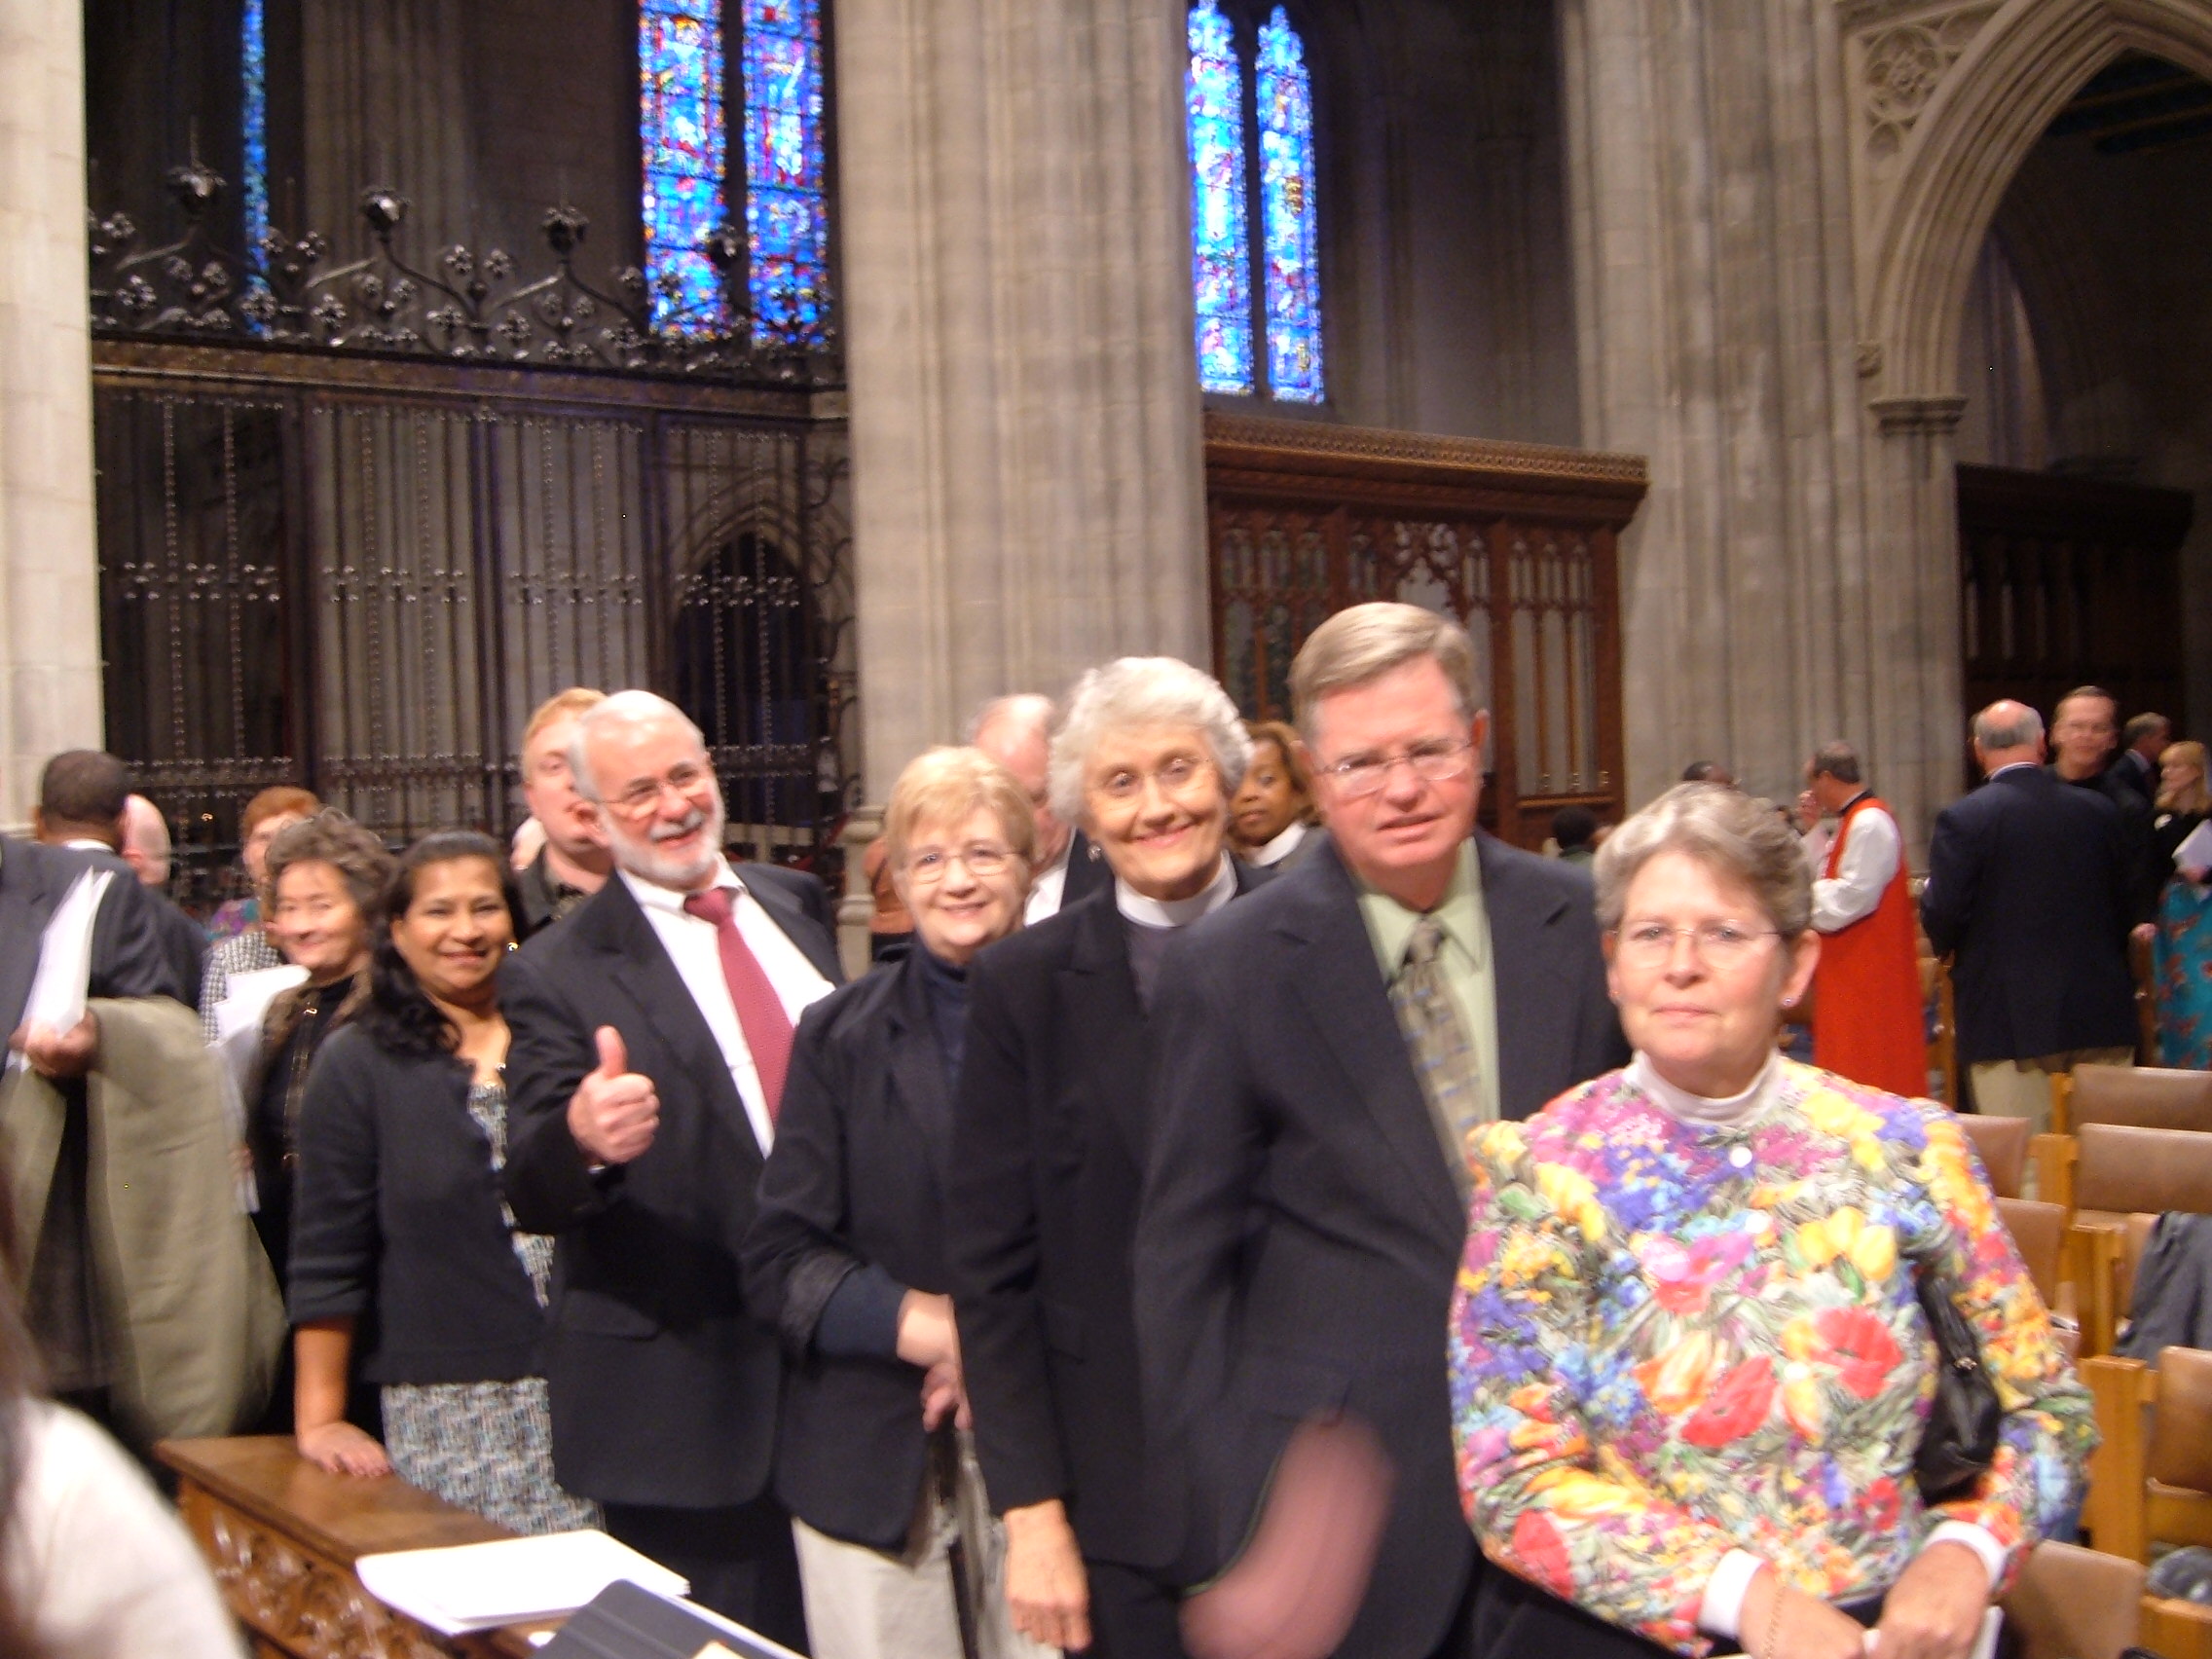 St. Barnabas members and friends pose for a photo after the service.